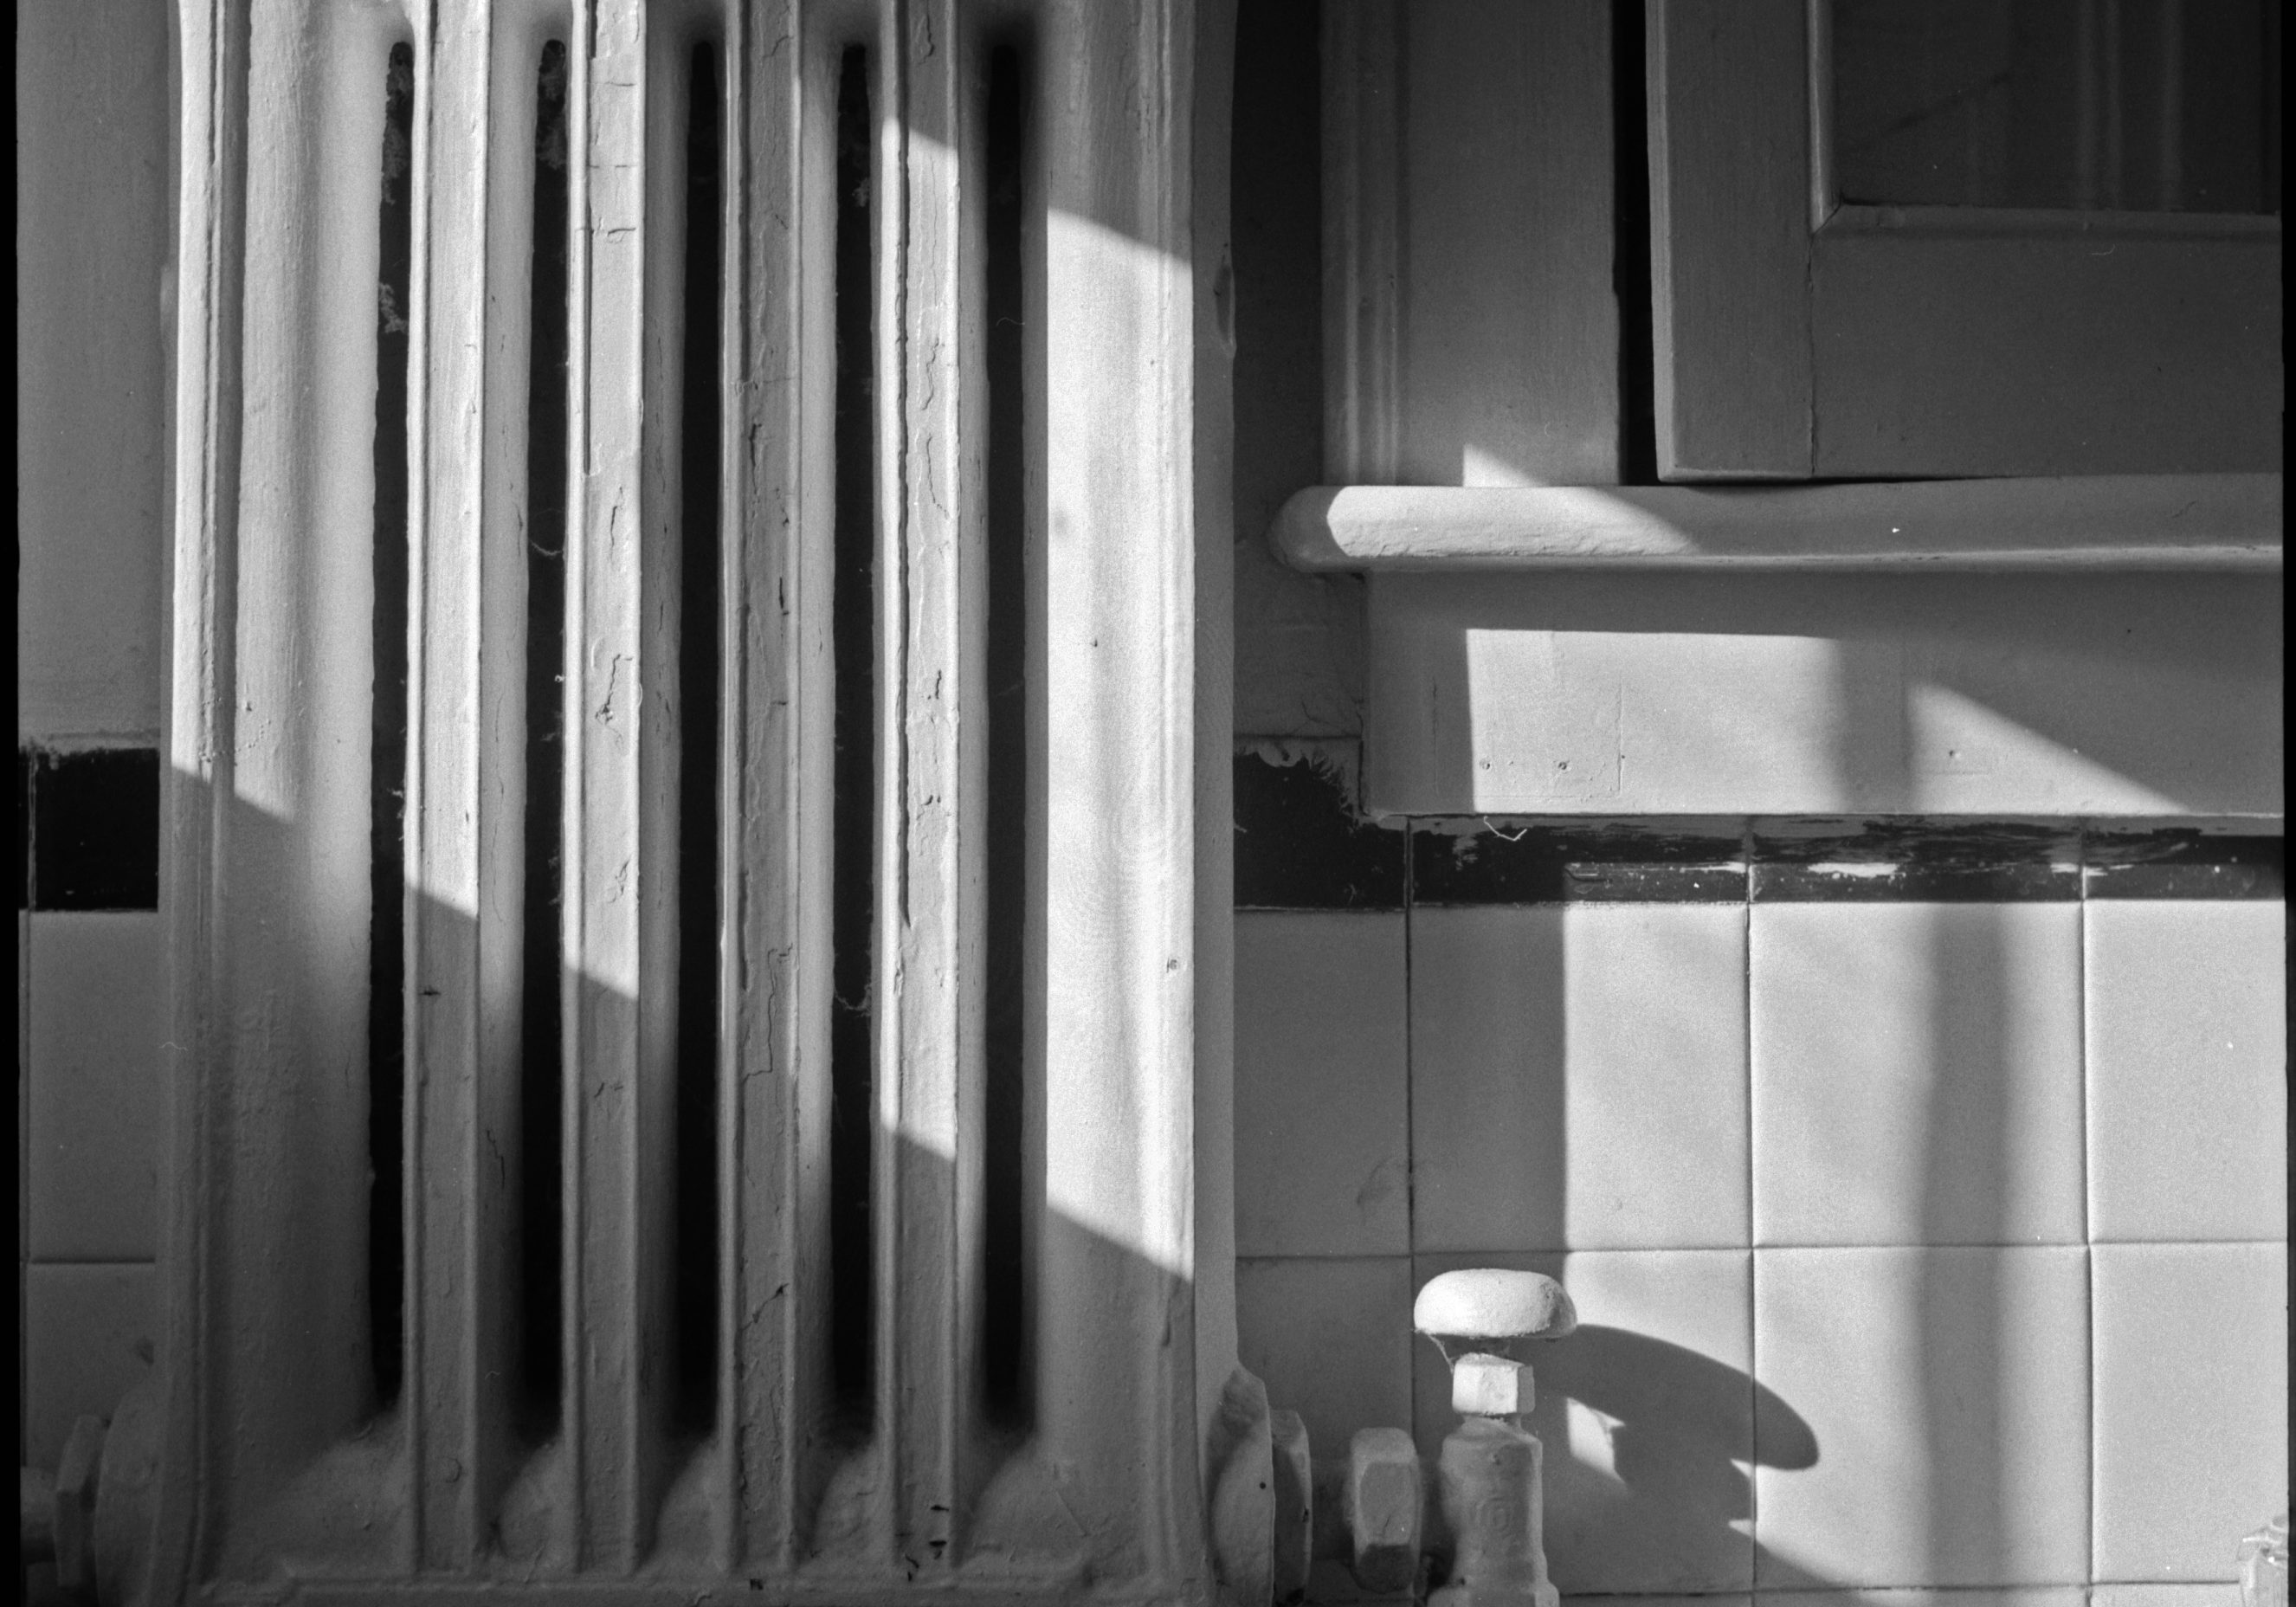 image of a bathroom radiator hanging on white tiles with a slant of sun falling across it and onto the sink.